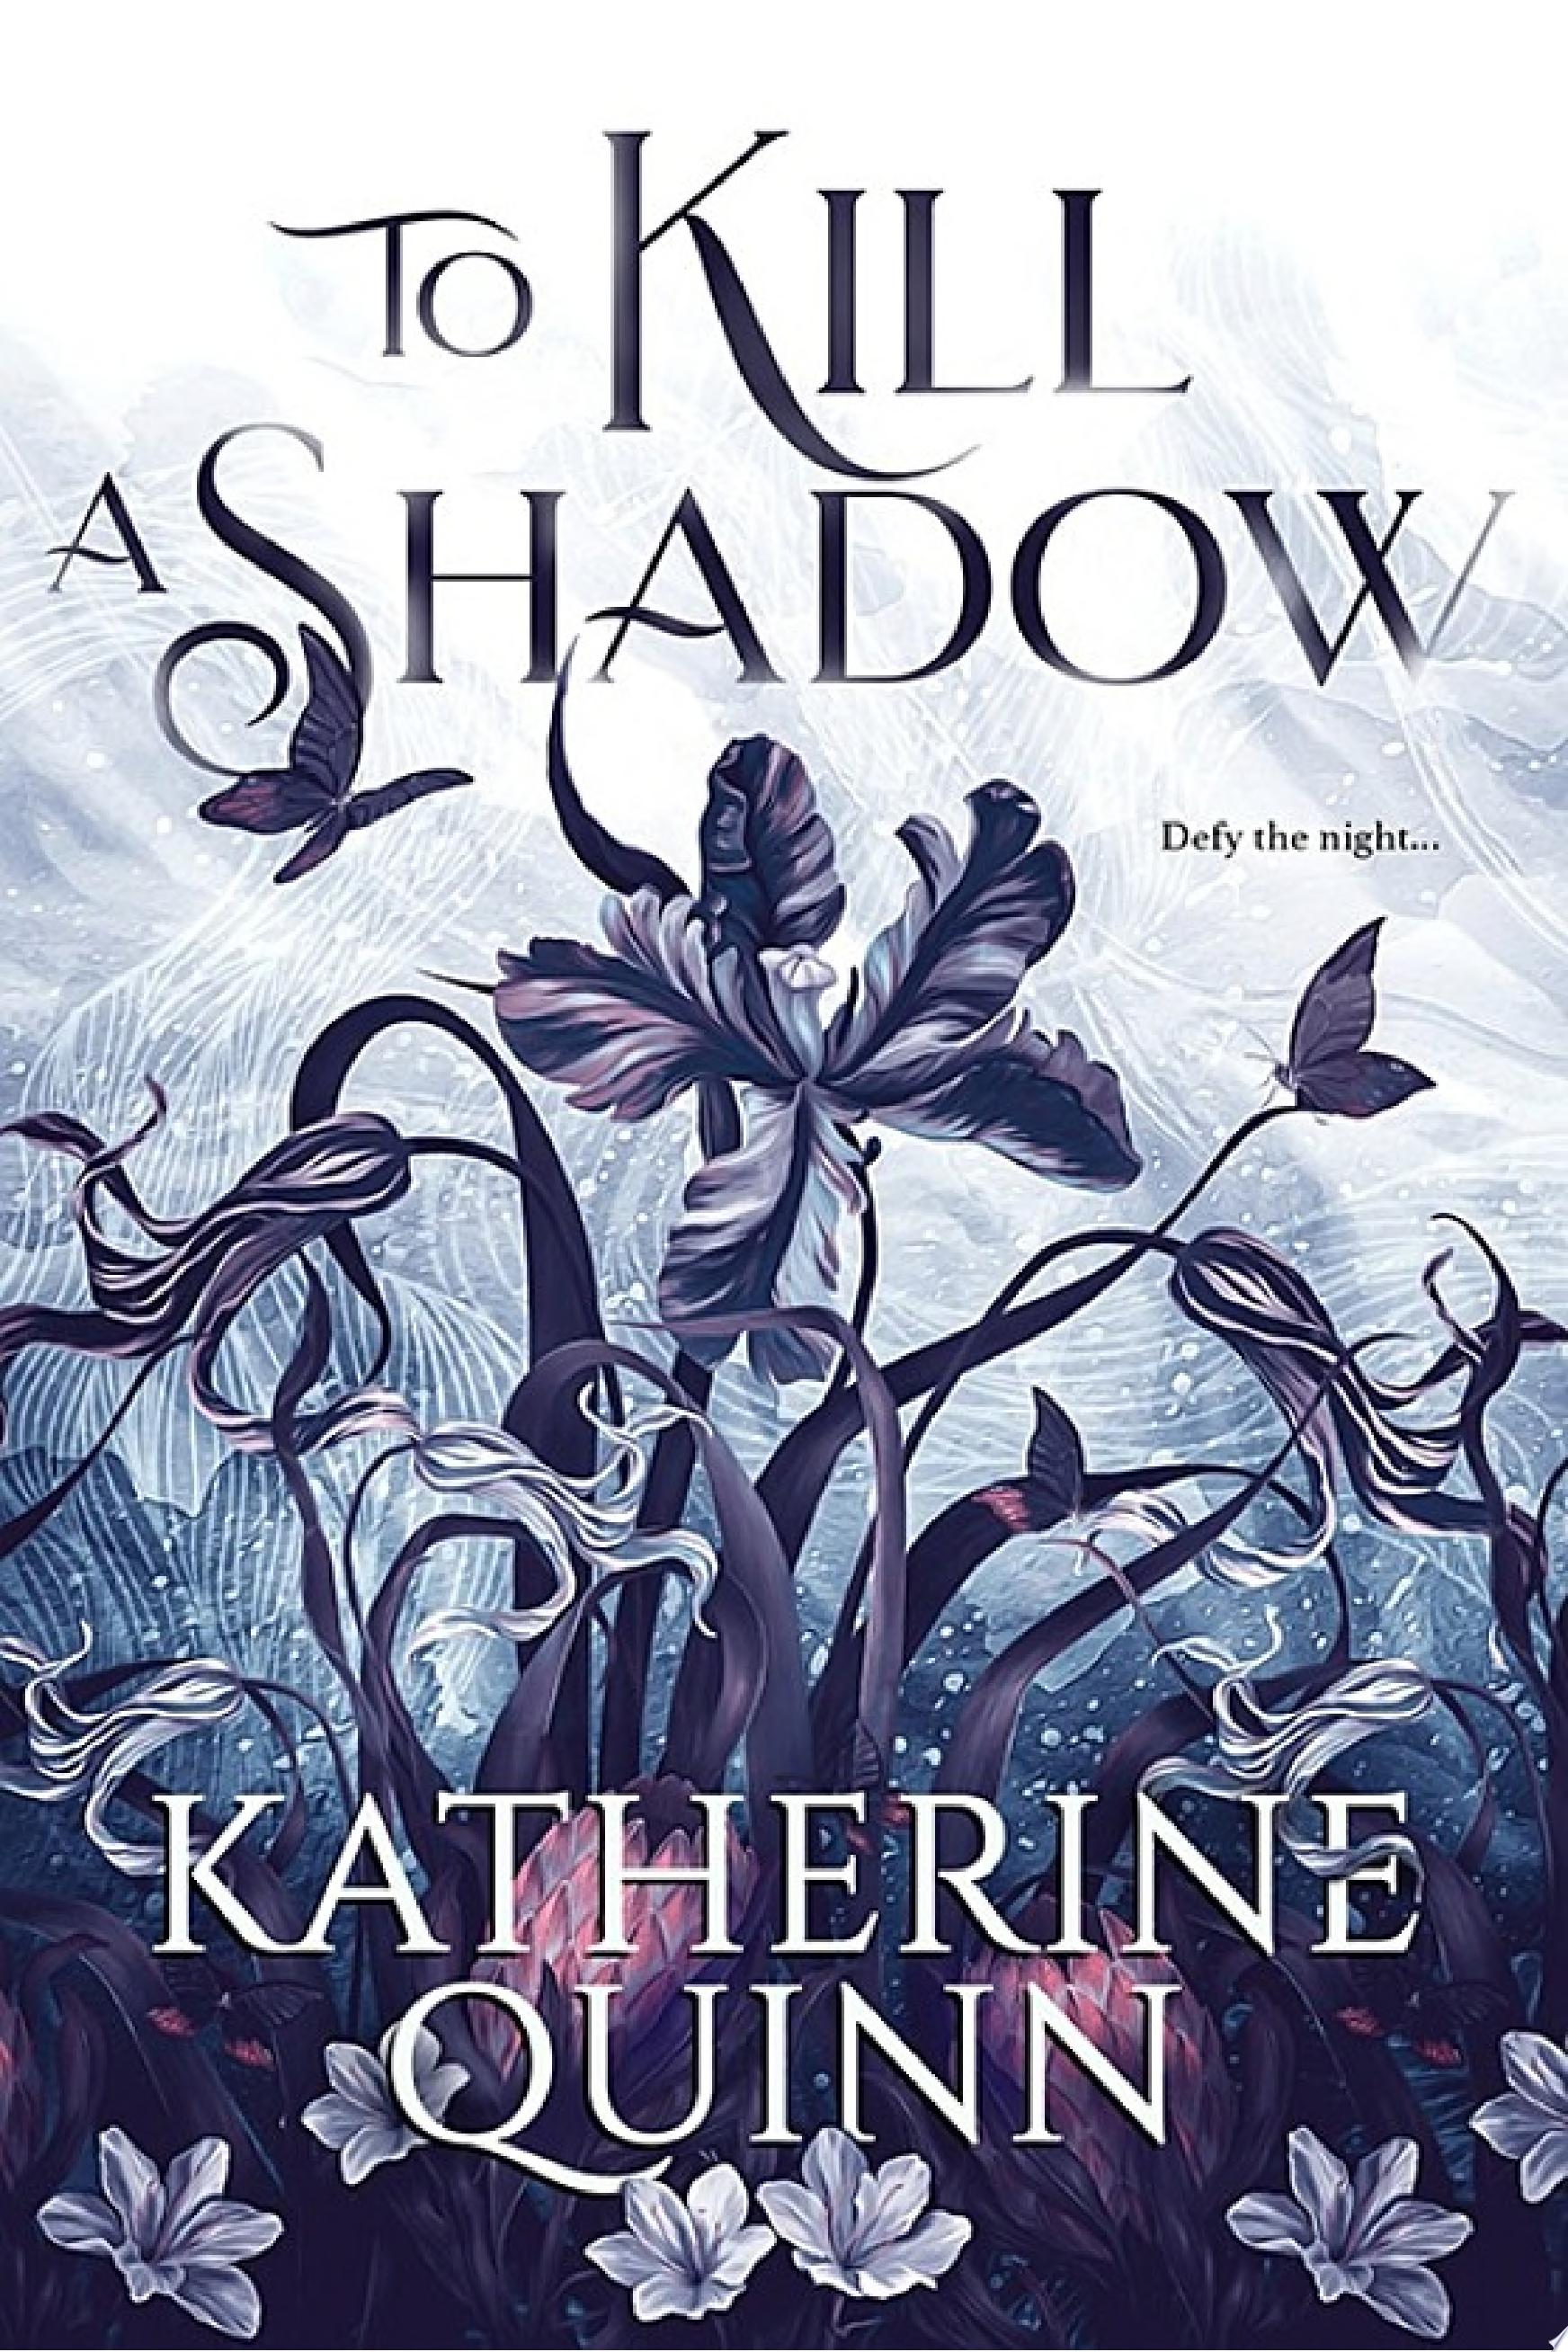 Image for "To Kill a Shadow"